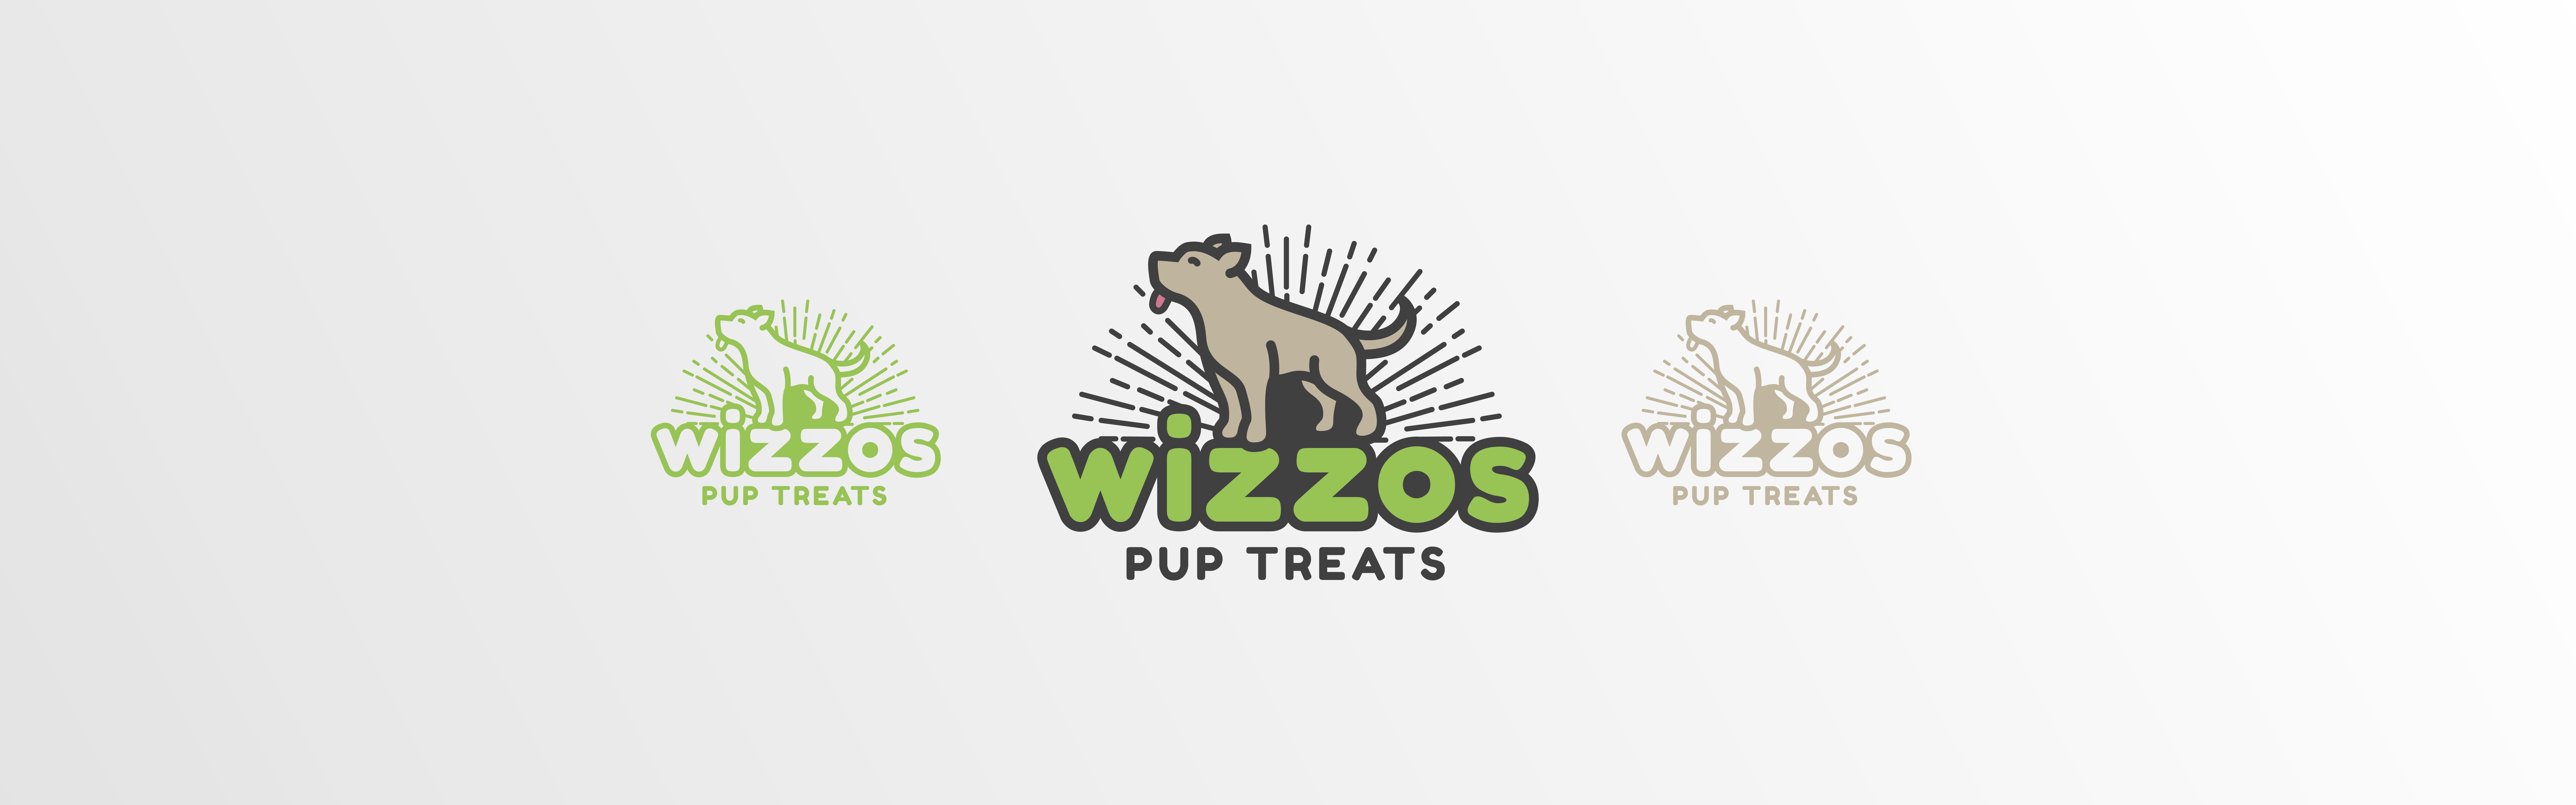 Three variations of the "Wizzos Pup Treats" logo, each featuring a stylized dog in a different color and pose, alongside the brand name.